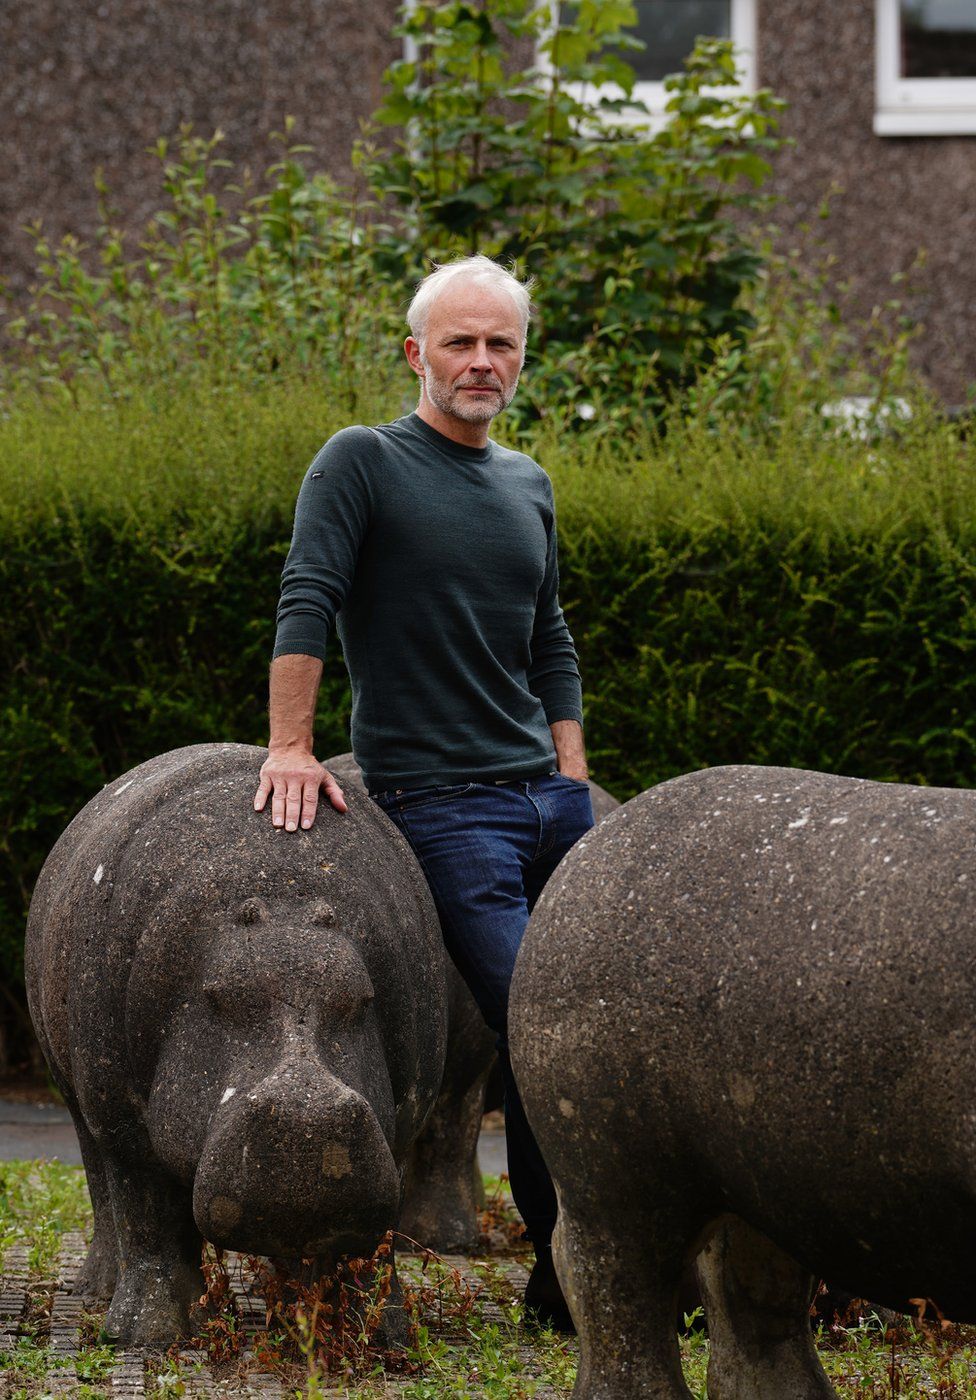 Mark Bonnar in Glenrothes with one of the concrete hippos made by his dad Stan in the 1970s Mark Bonnar in Glenrothes with one of the concrete hippos made by his dad Stan in the 1970s.